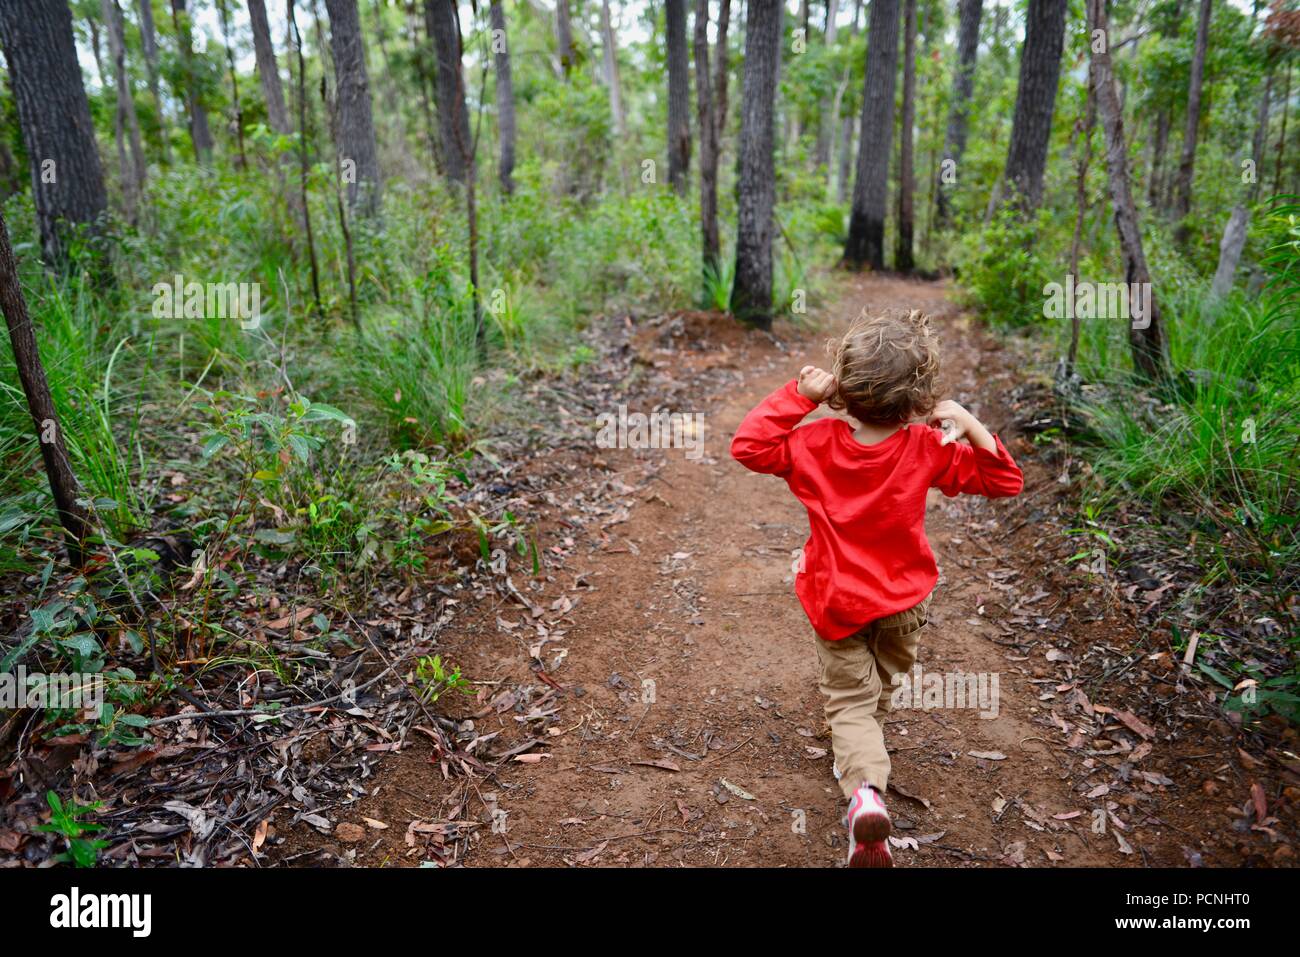 A young Child runs through a forest, Cardwell, Queensland, Australia Stock Photo